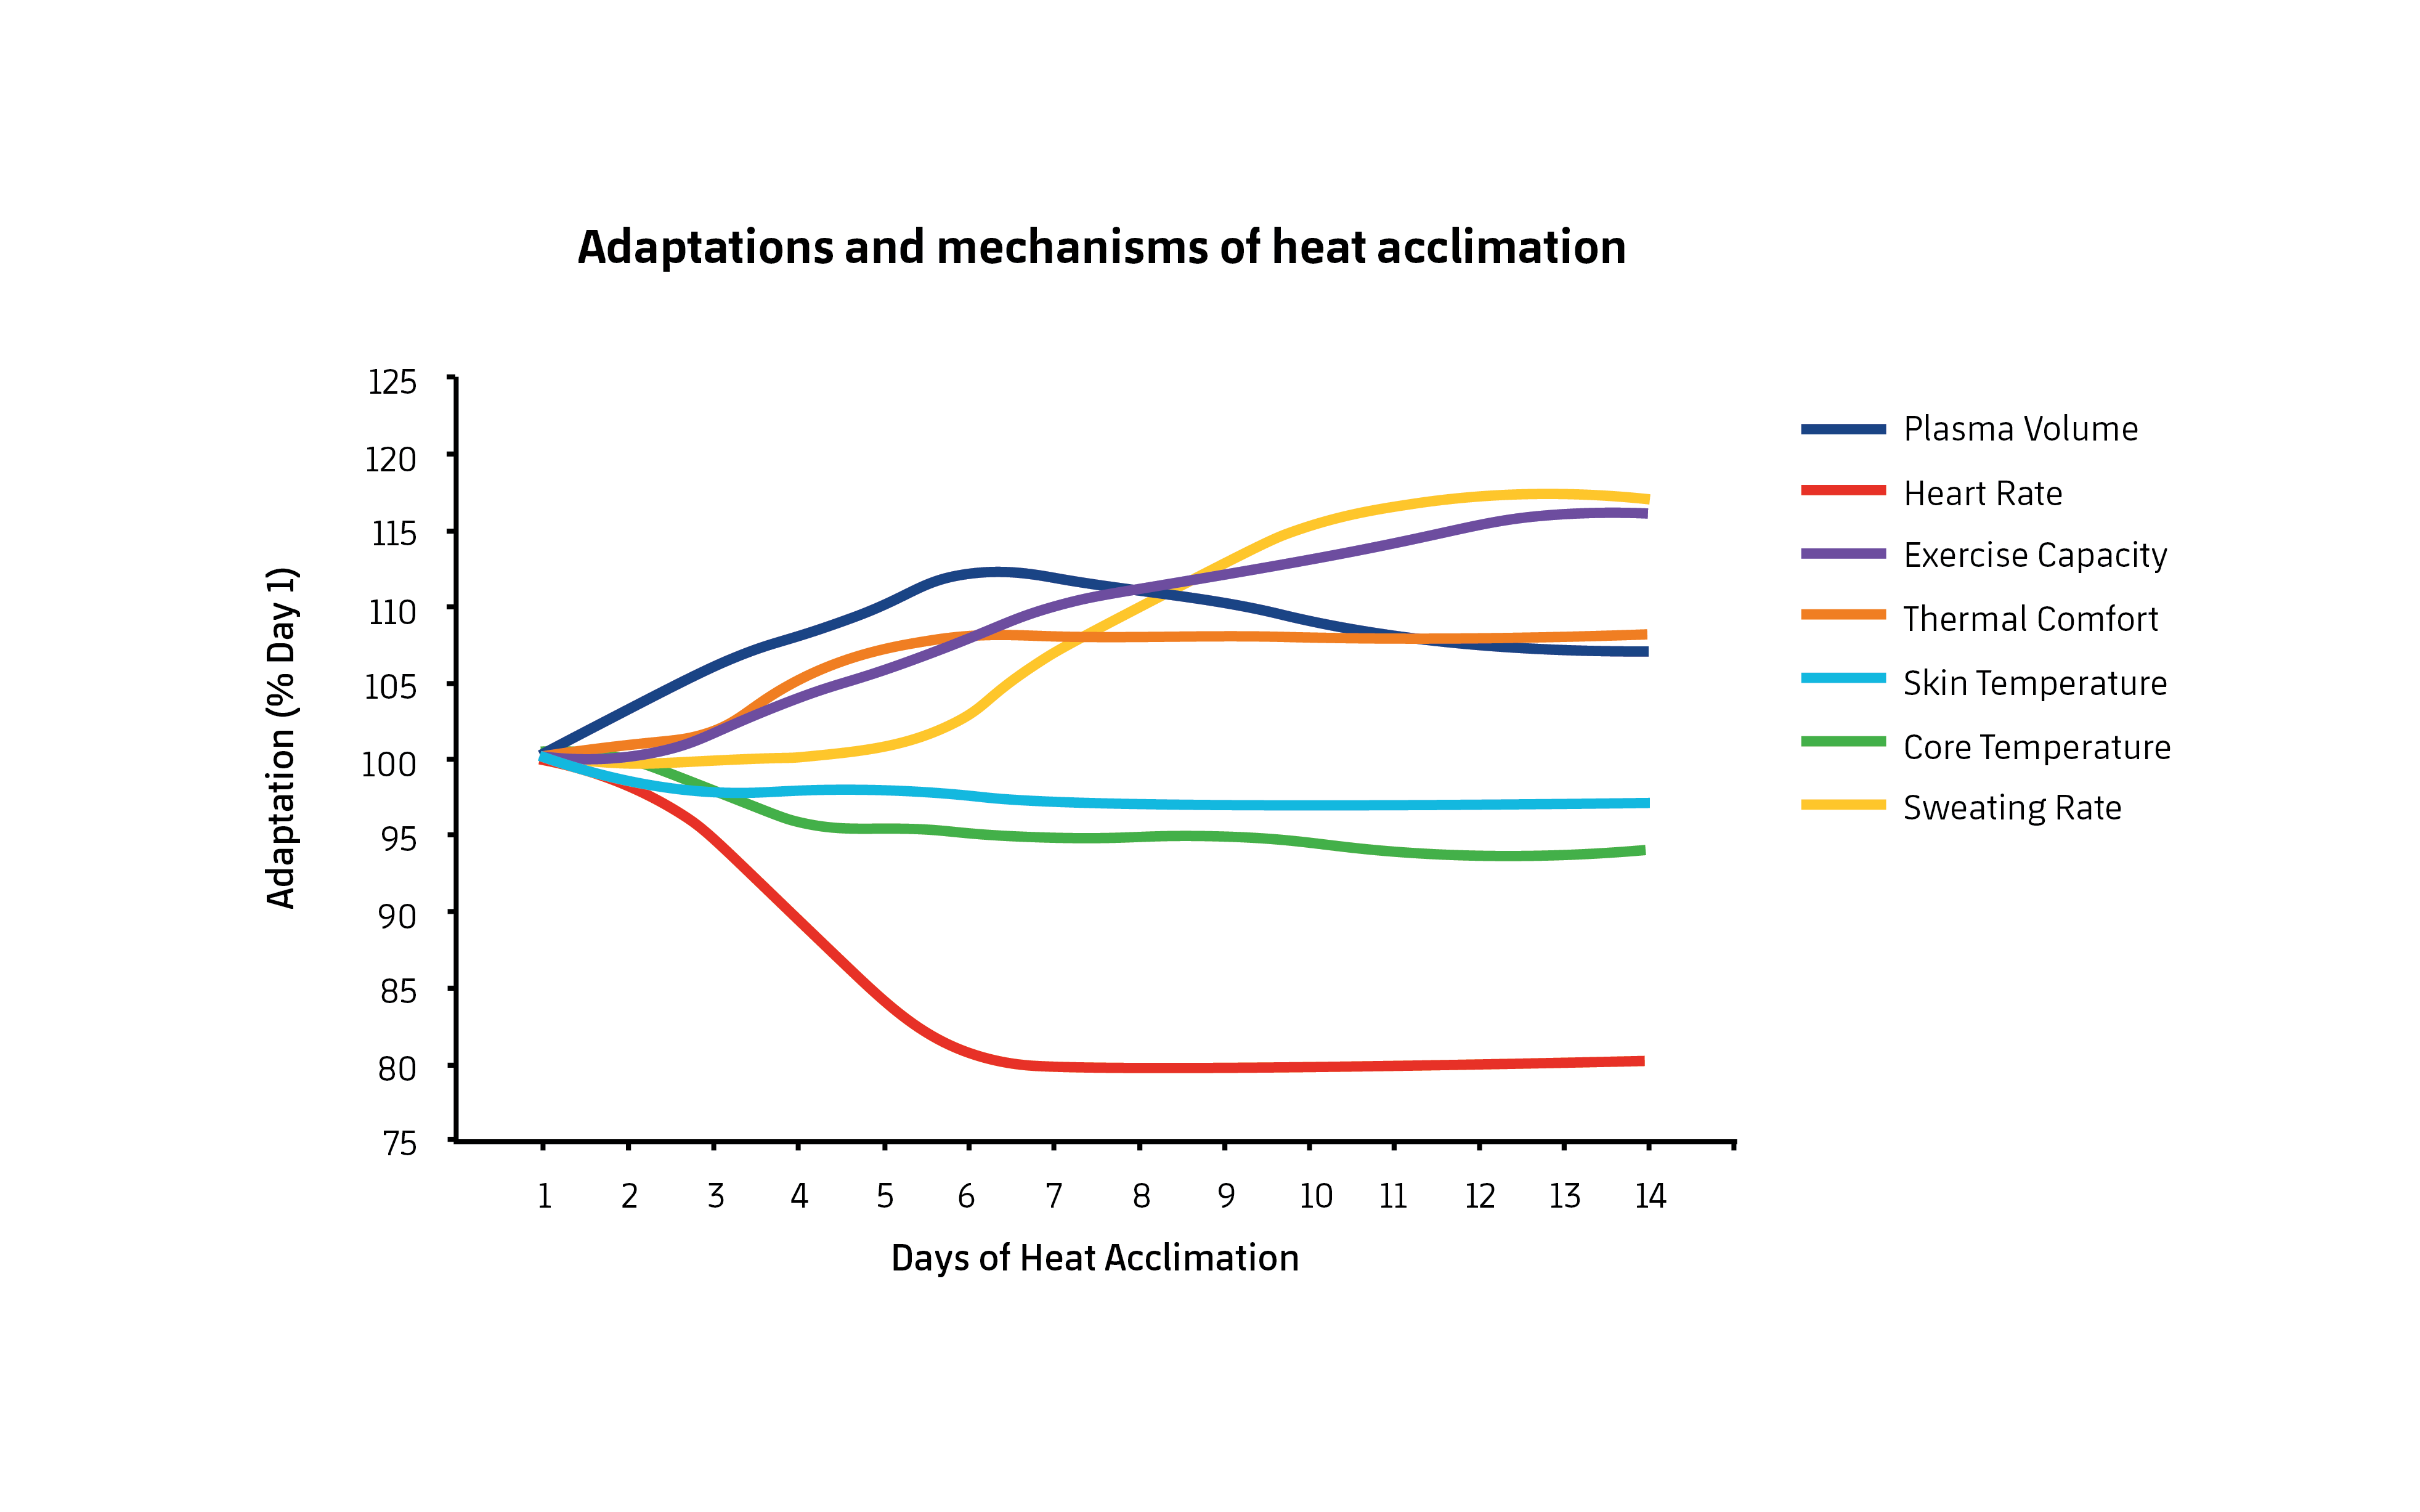 Figure 1. Adaptations after a period of heat acclimation. Modified from Périard et al. (2015).